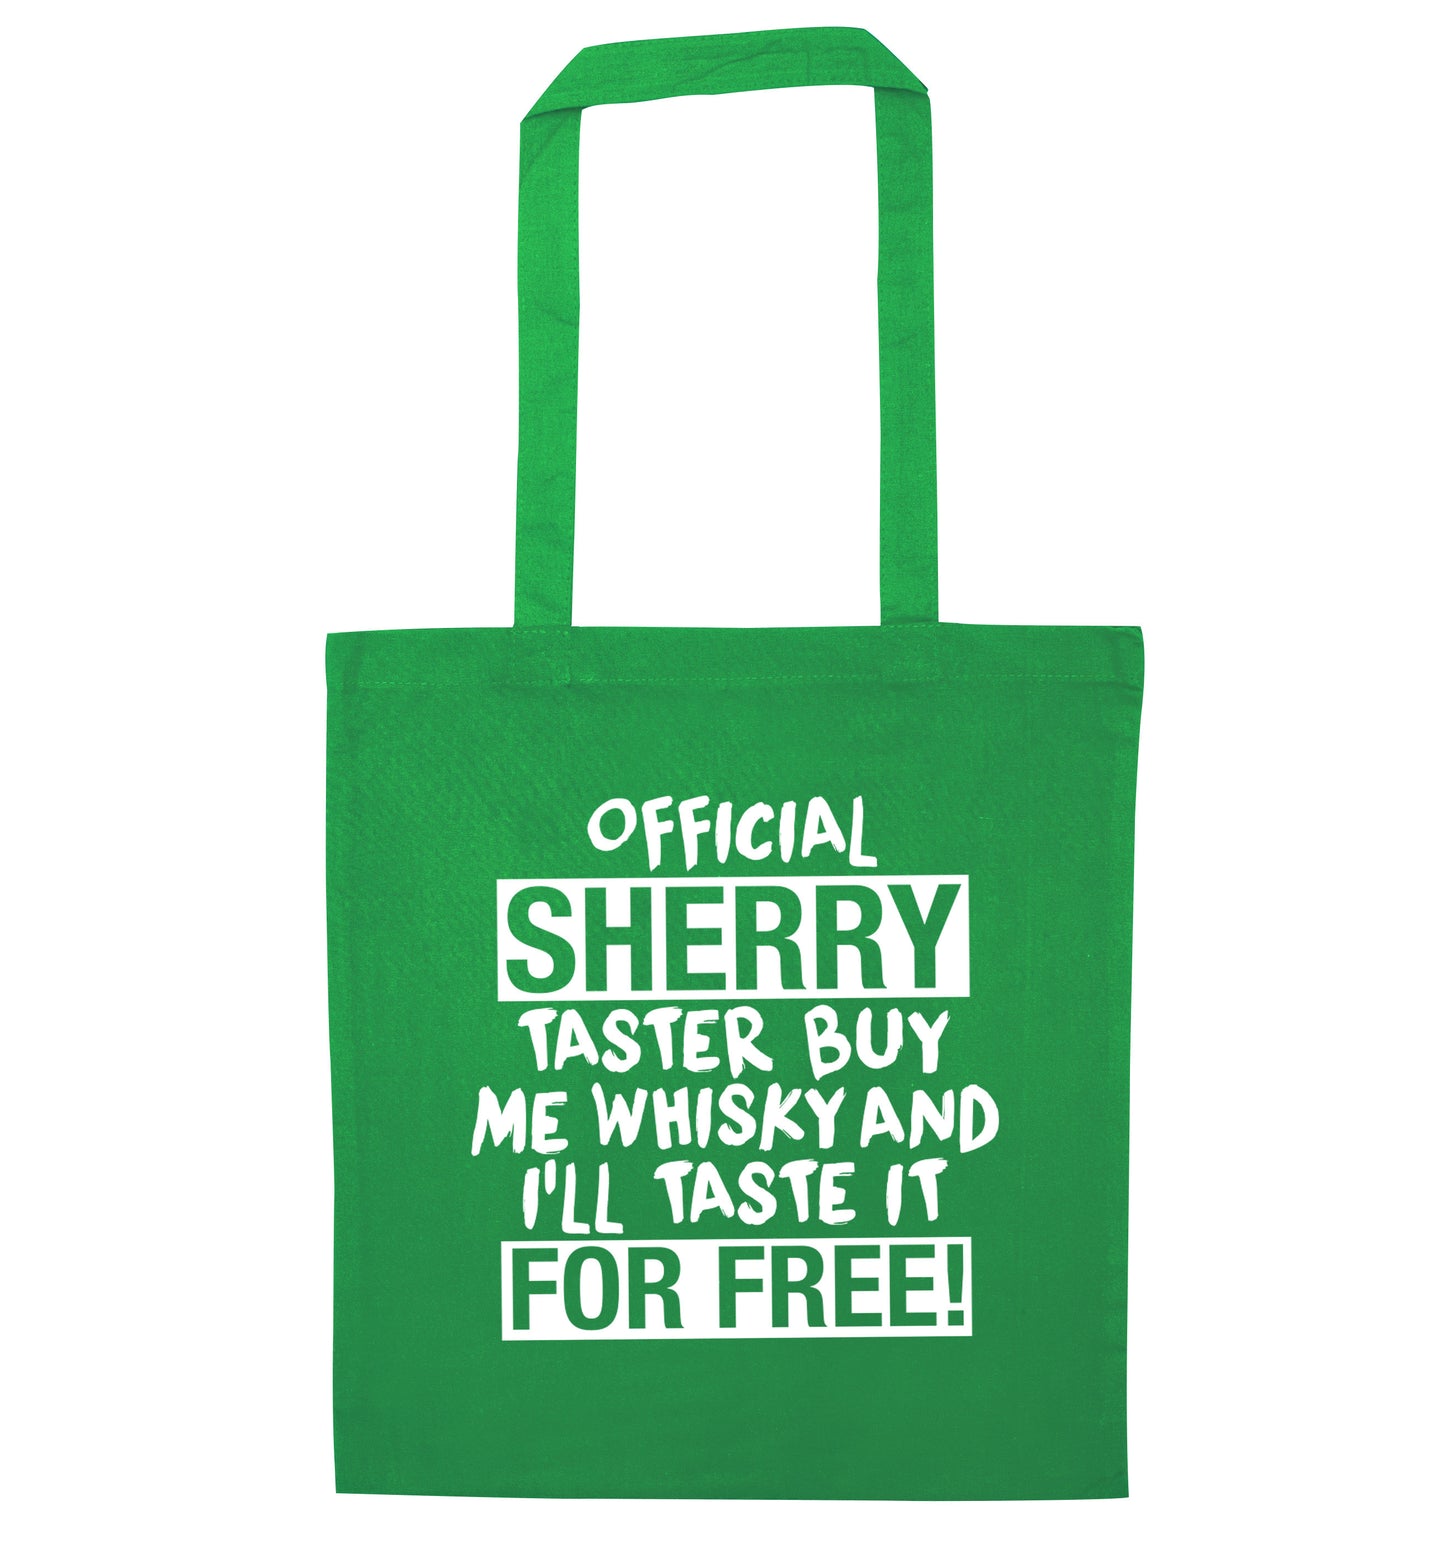 Official sherry taster buy me sherry and I'll taste it for free green tote bag